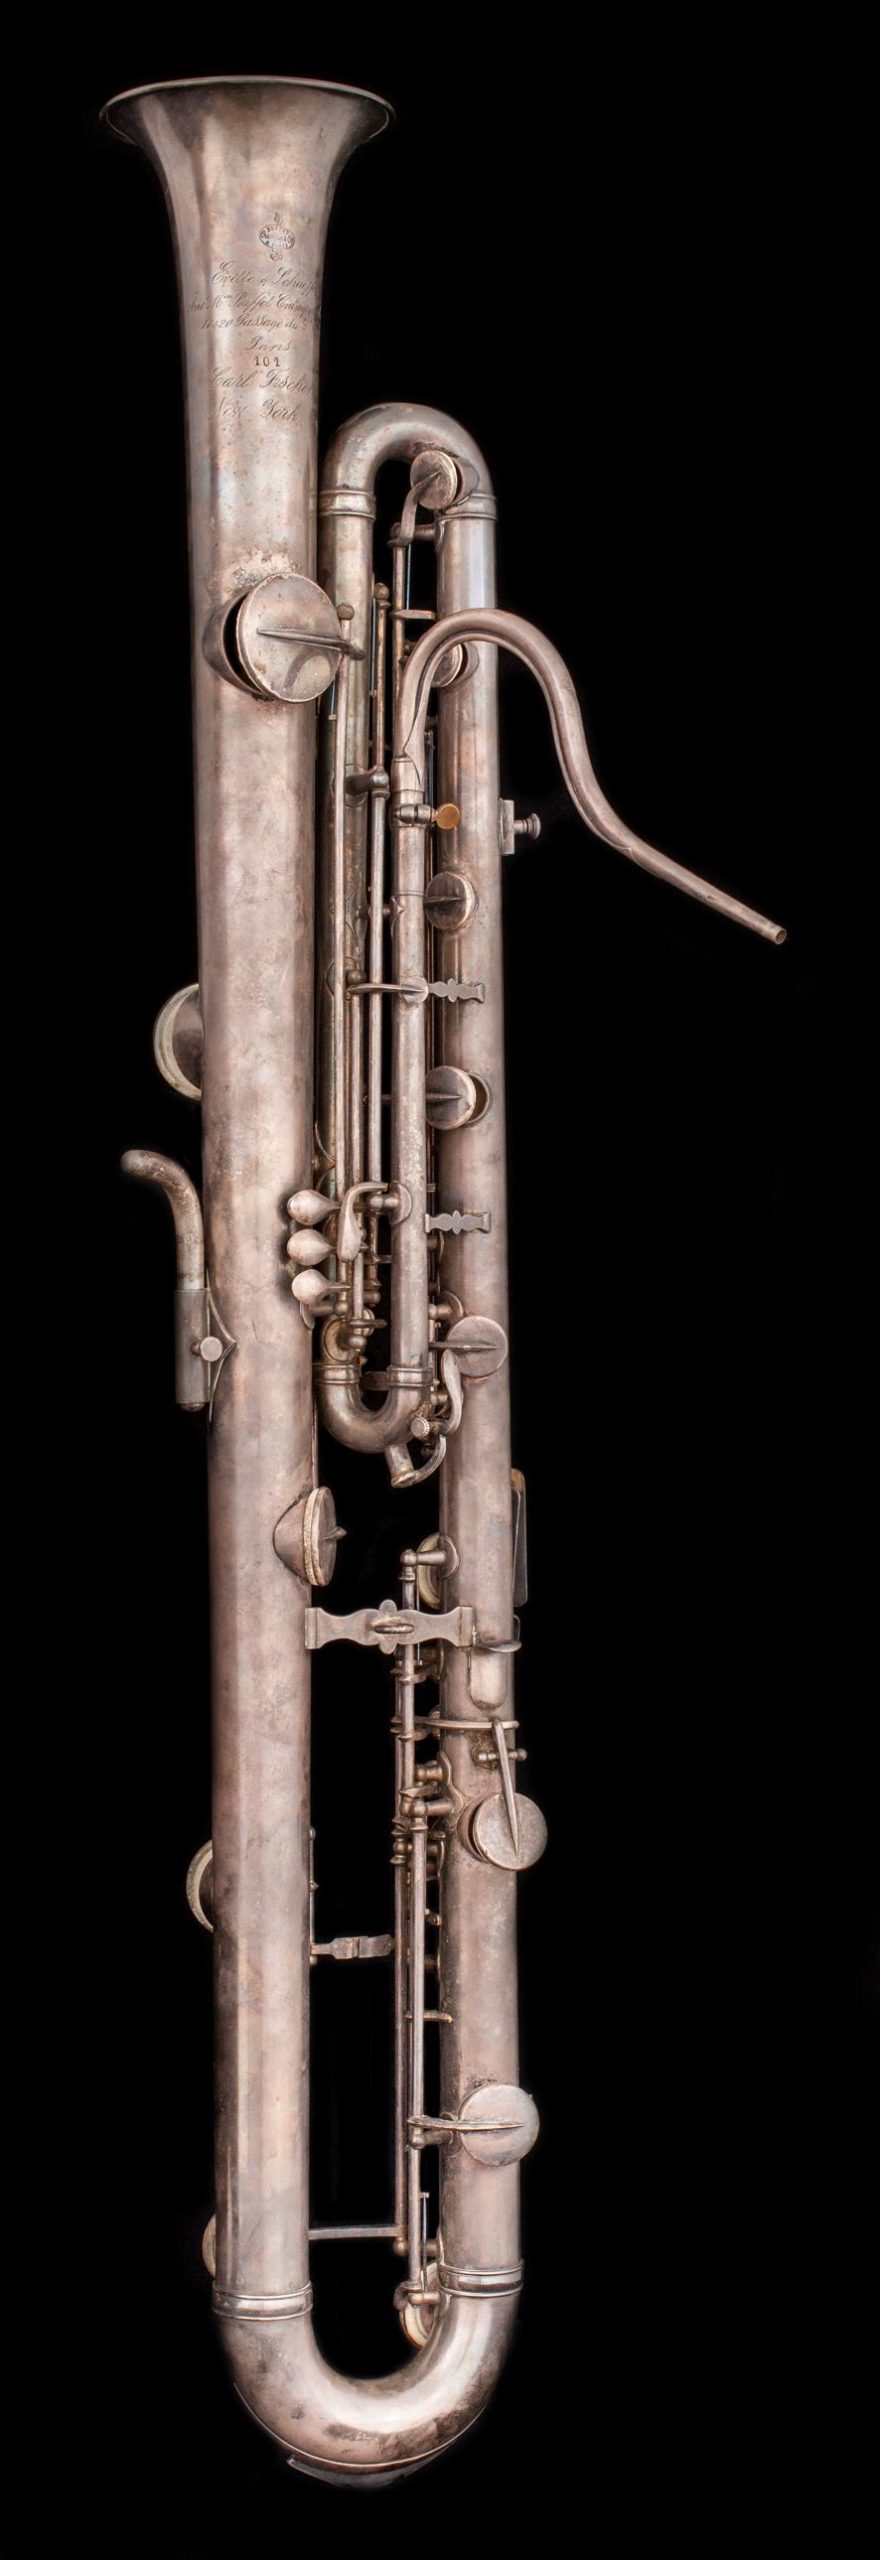 Silver instrument with keys, similar to saxophone, but with bell facing upwards.